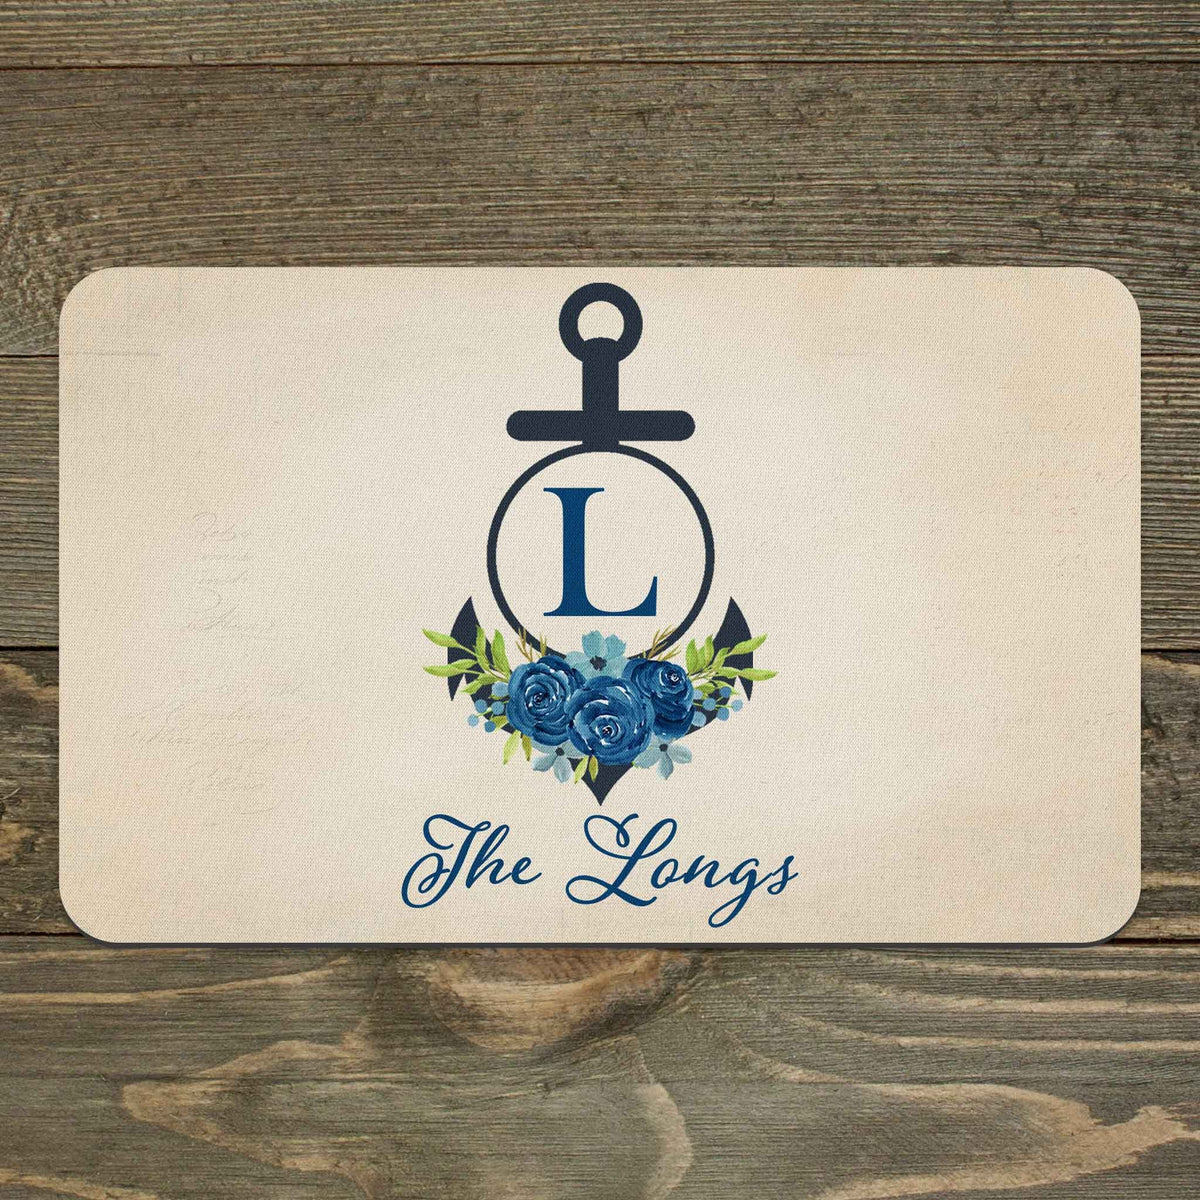 Custom Placemats | Personalized Dining and Serving | Anchor with Navy Roses